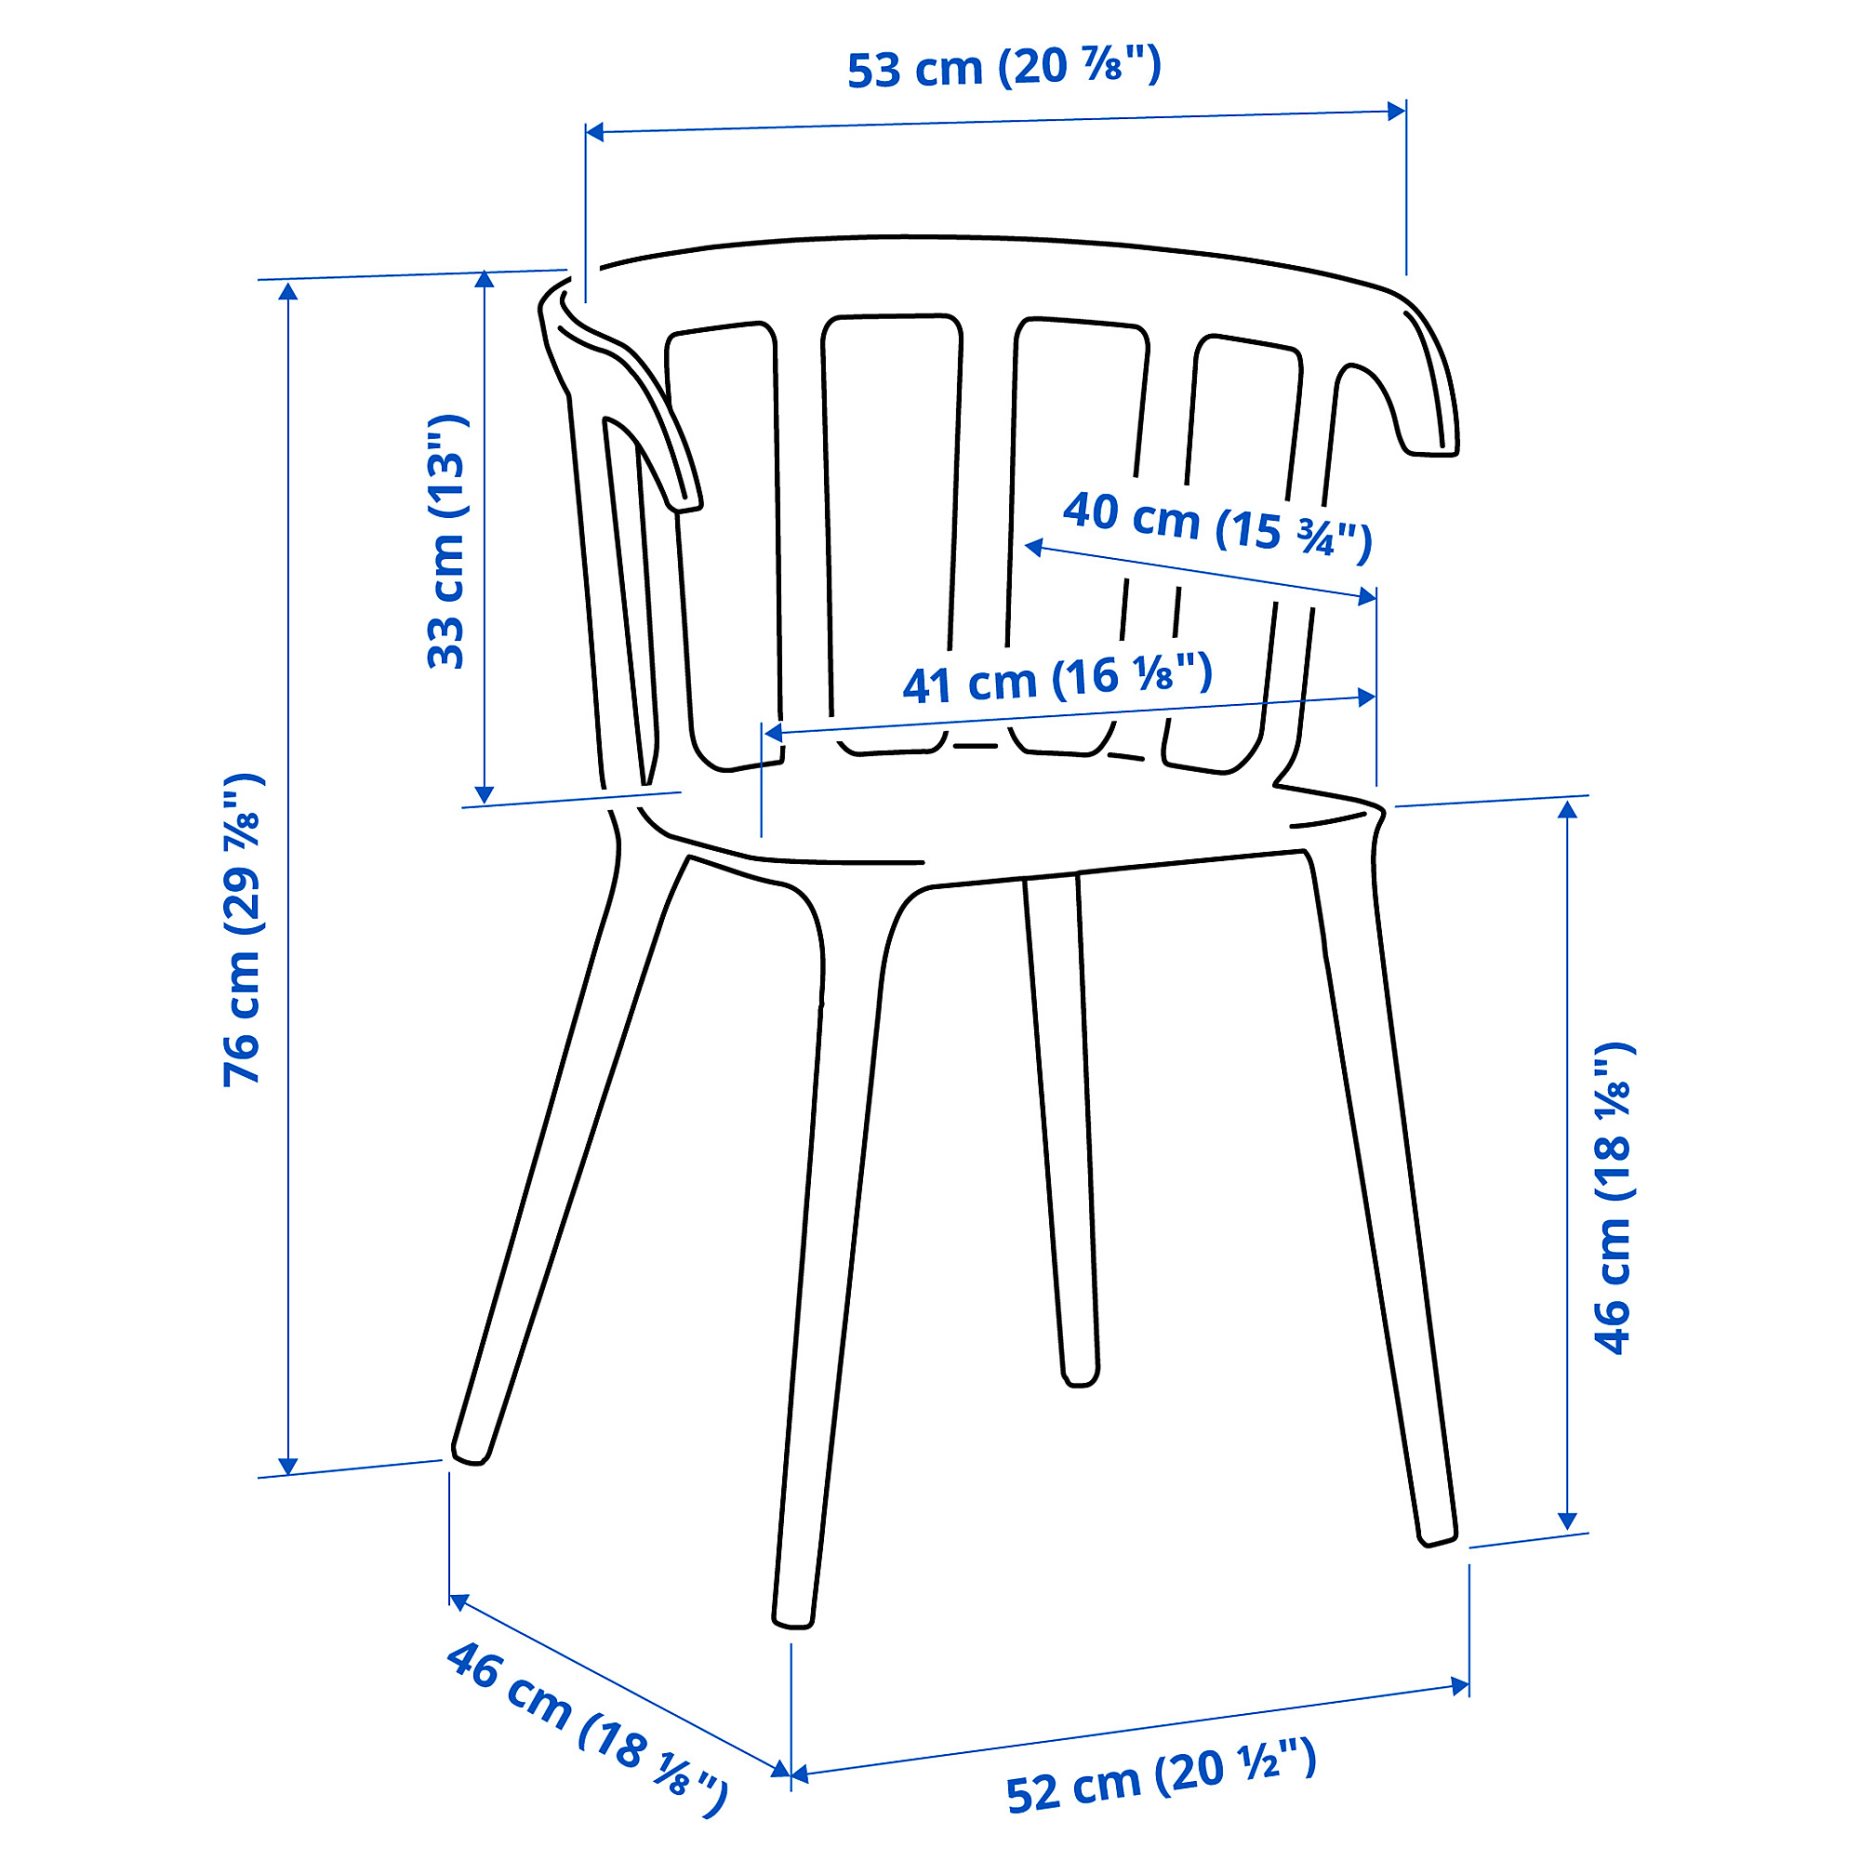 IKEAPS2012, chair with armrests, 702.068.04